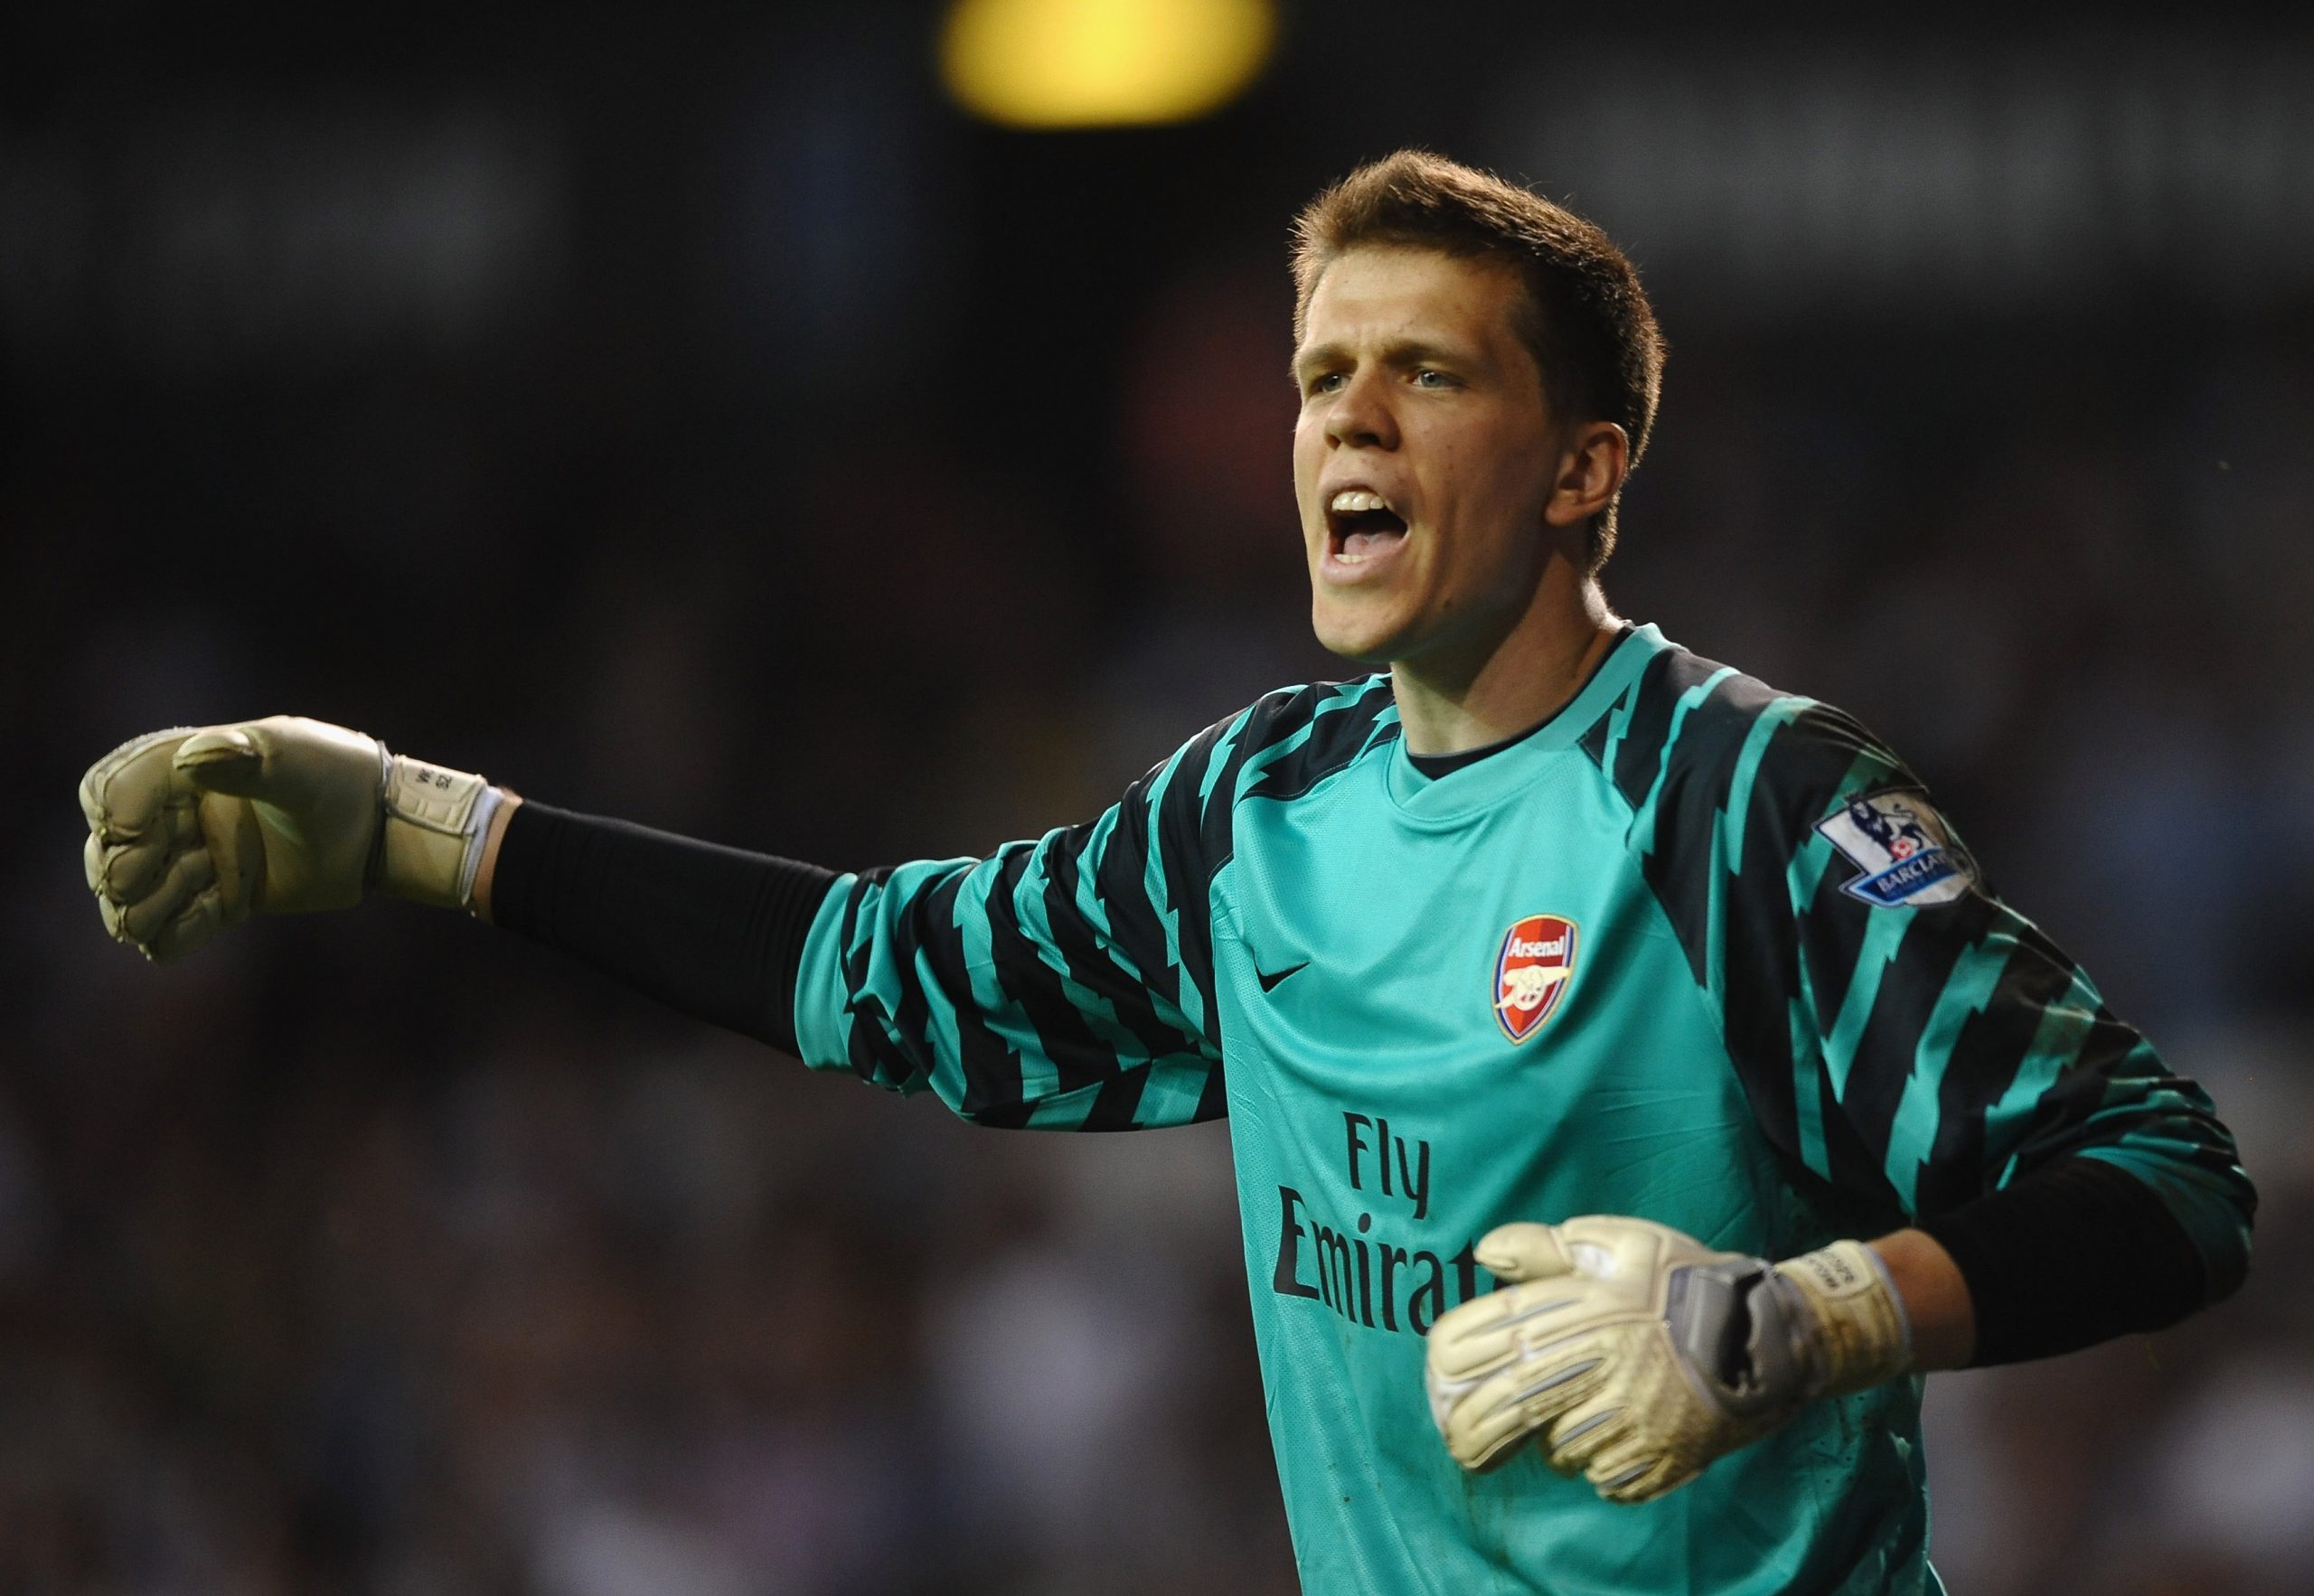 Wojciech Szczesny in action against Tottenham Hotspur during his time at Arsenal. (Photo by Laurence Griffiths/Getty Images)